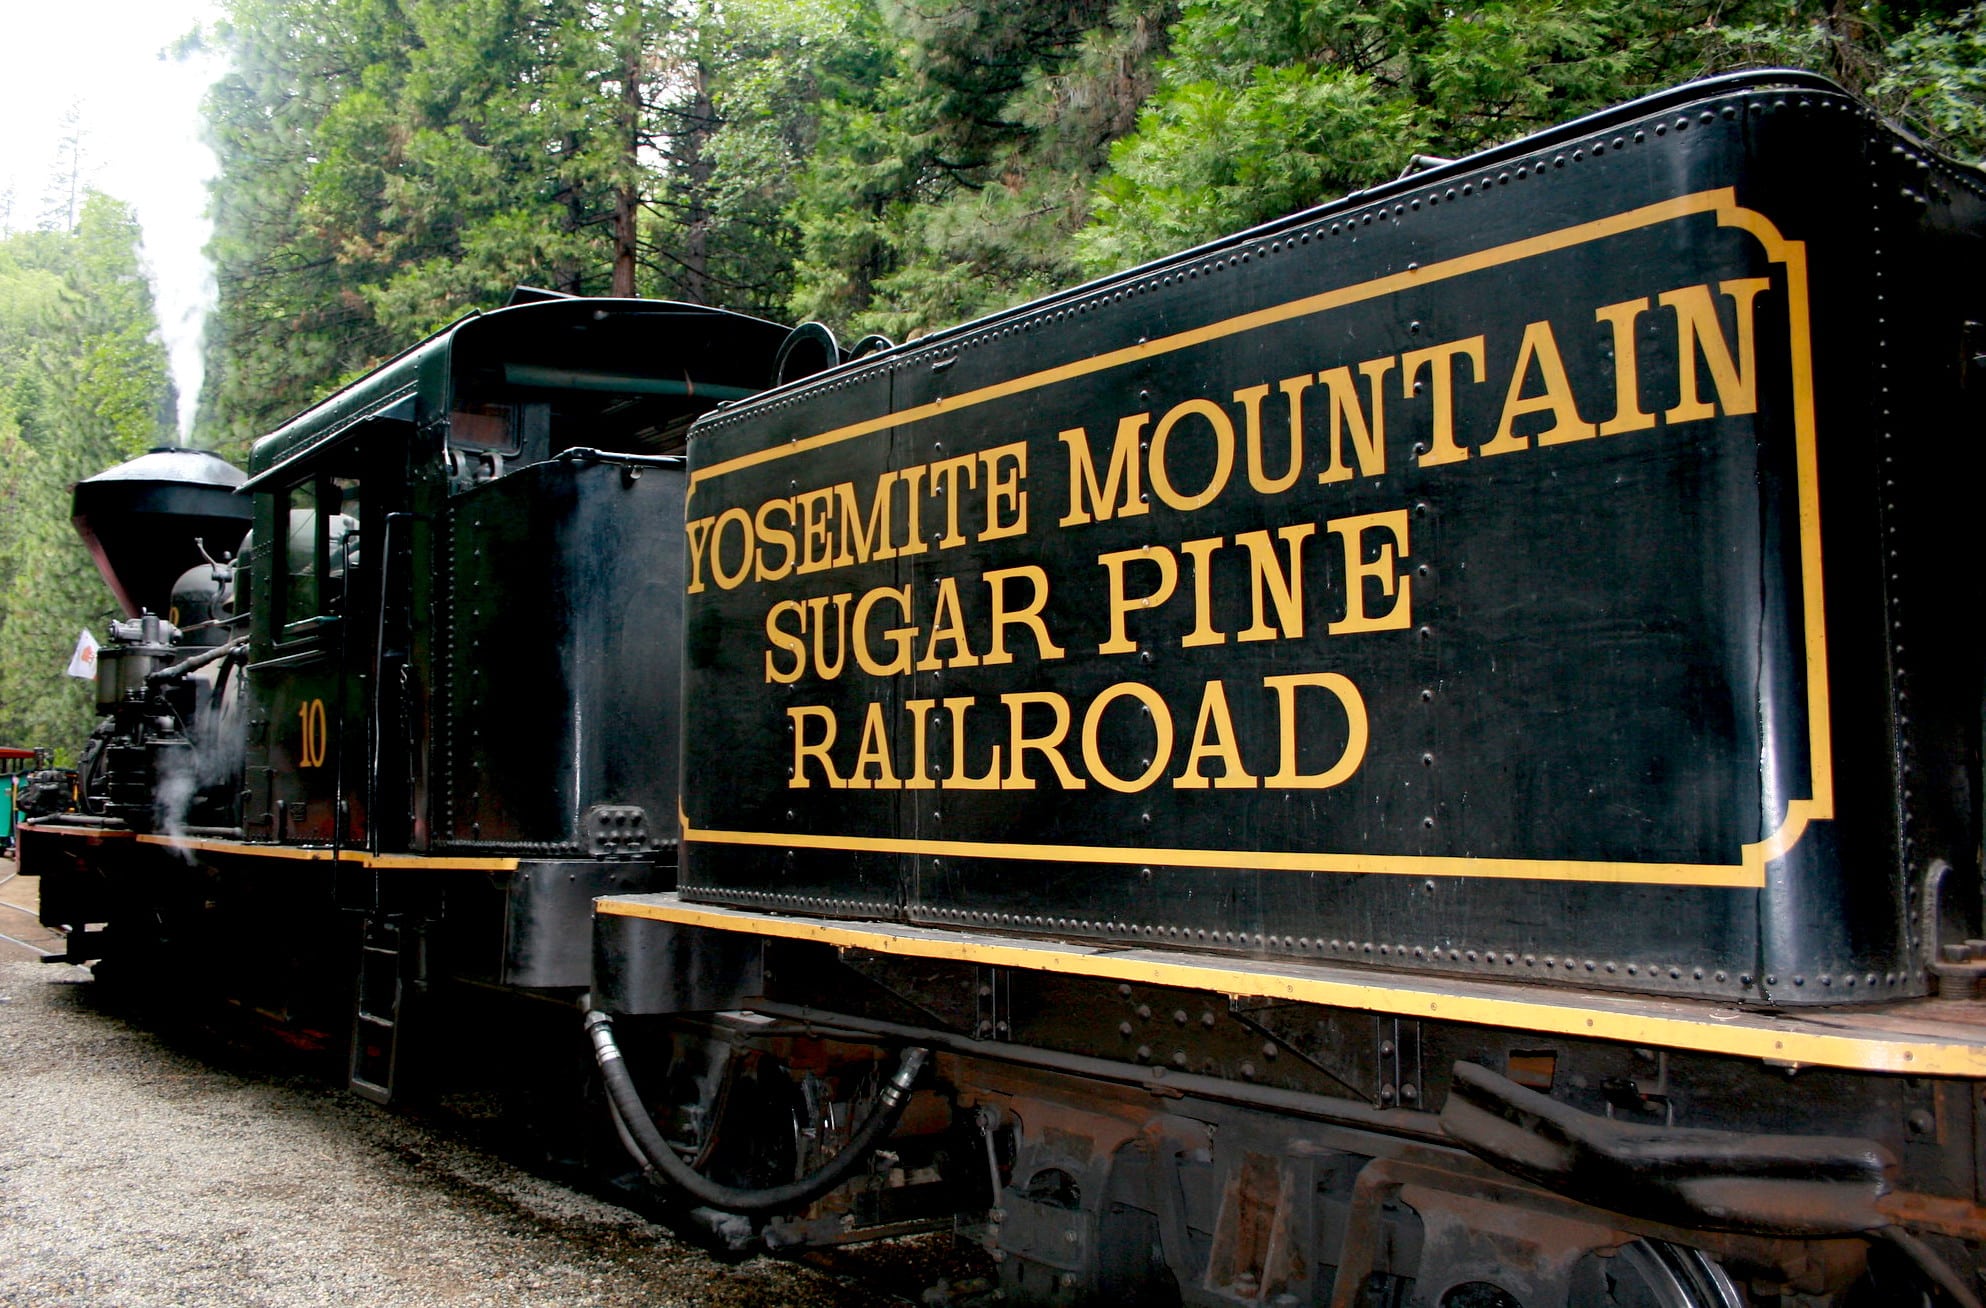 A black steam locomotive with the words Yosemite Mountain Sugar Pine Railroad in yellow on its side heads into the forest